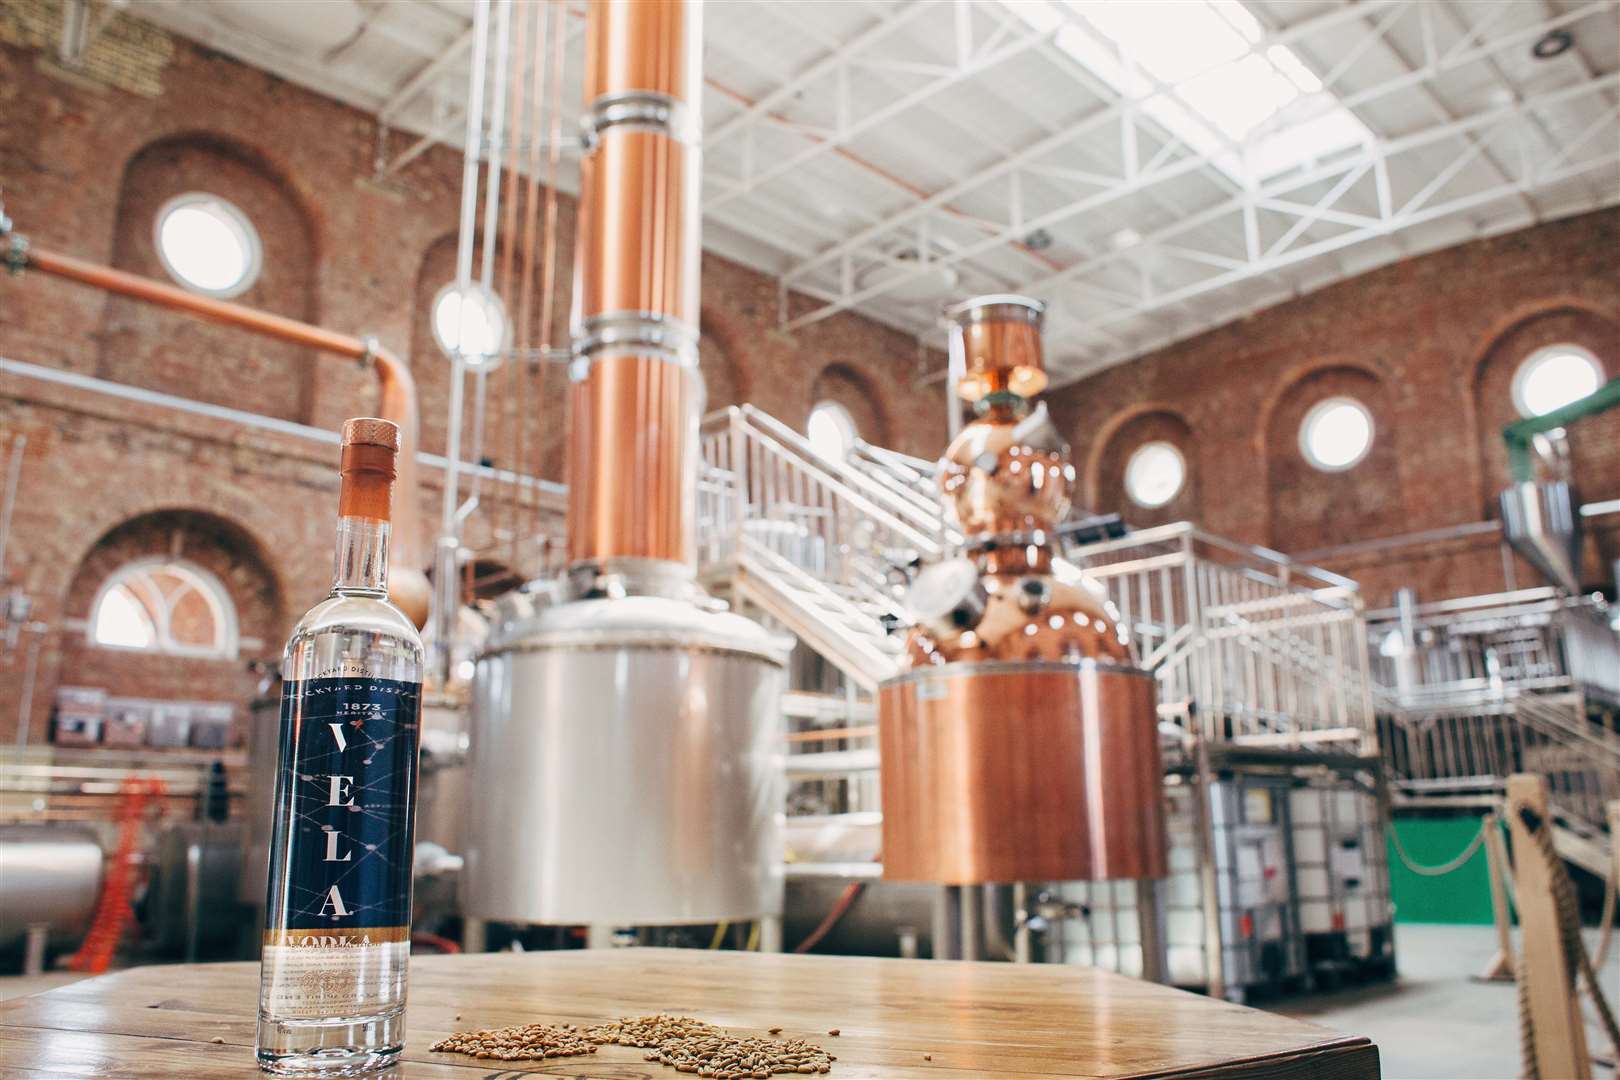 Copper Rivet in Chatham produces gin, vodka and whisky.